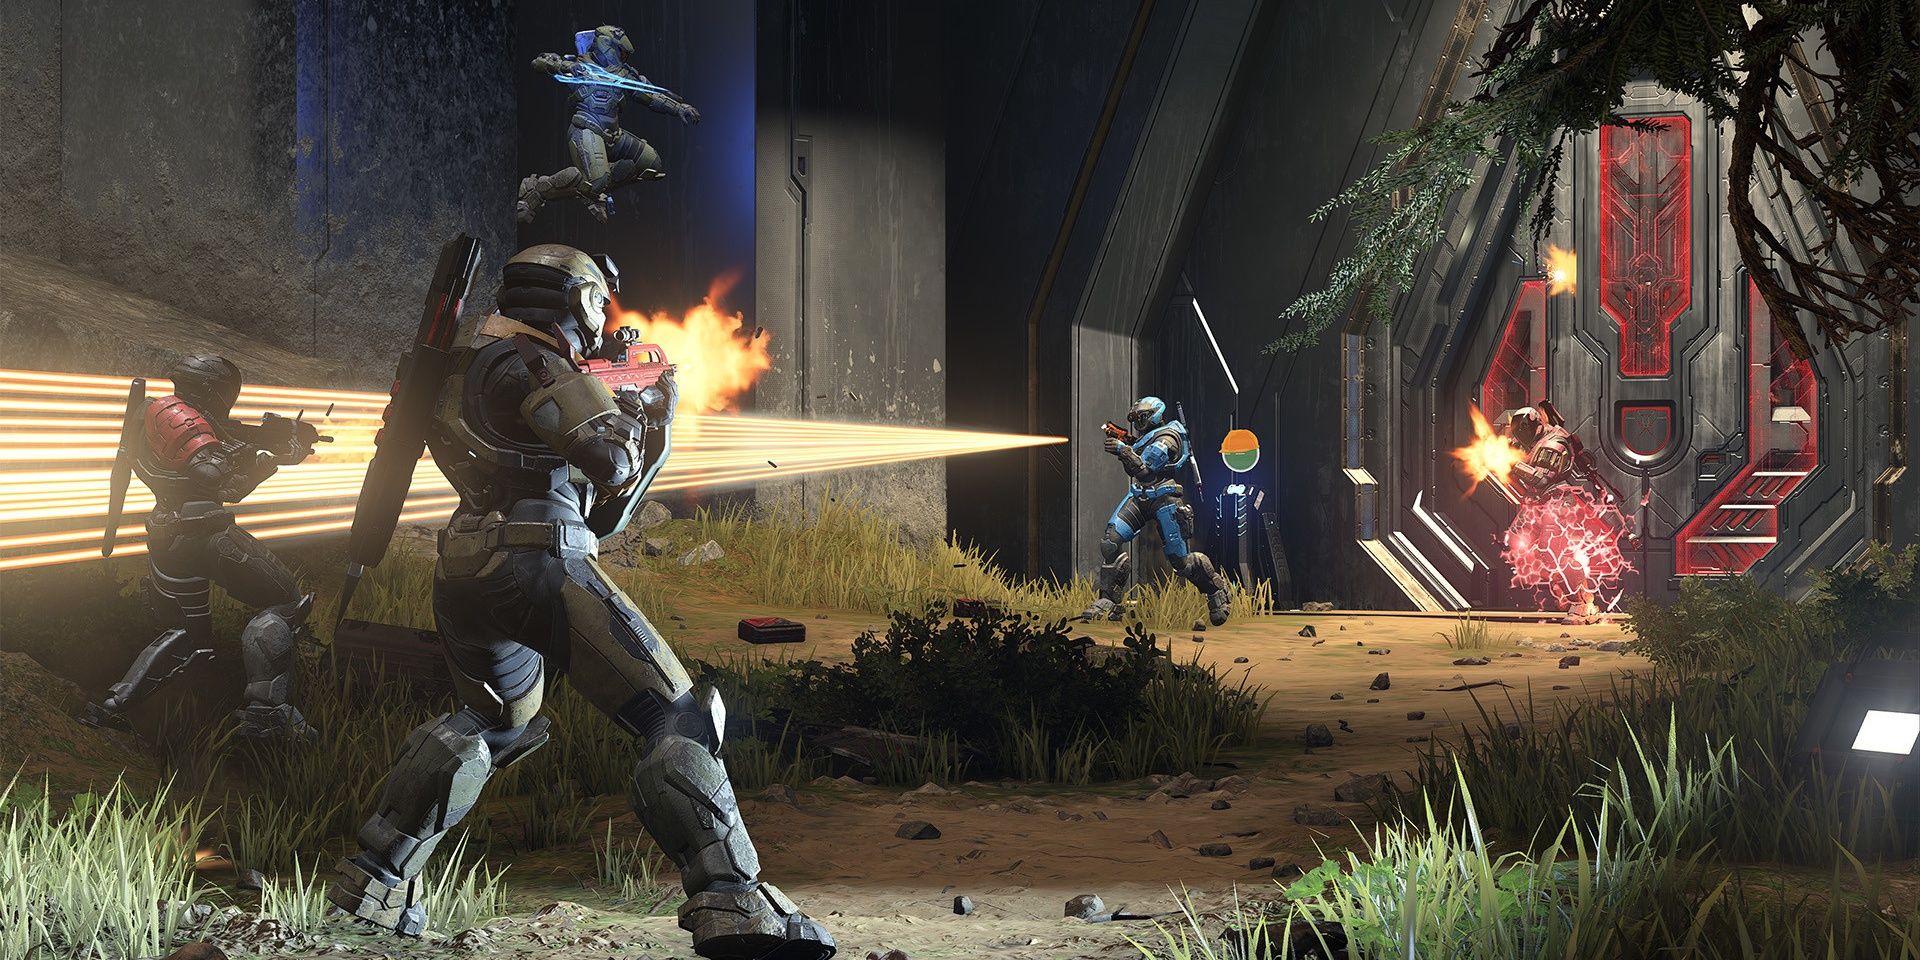 A screenshot showing a firefight between opposing teams in Halo Infinite